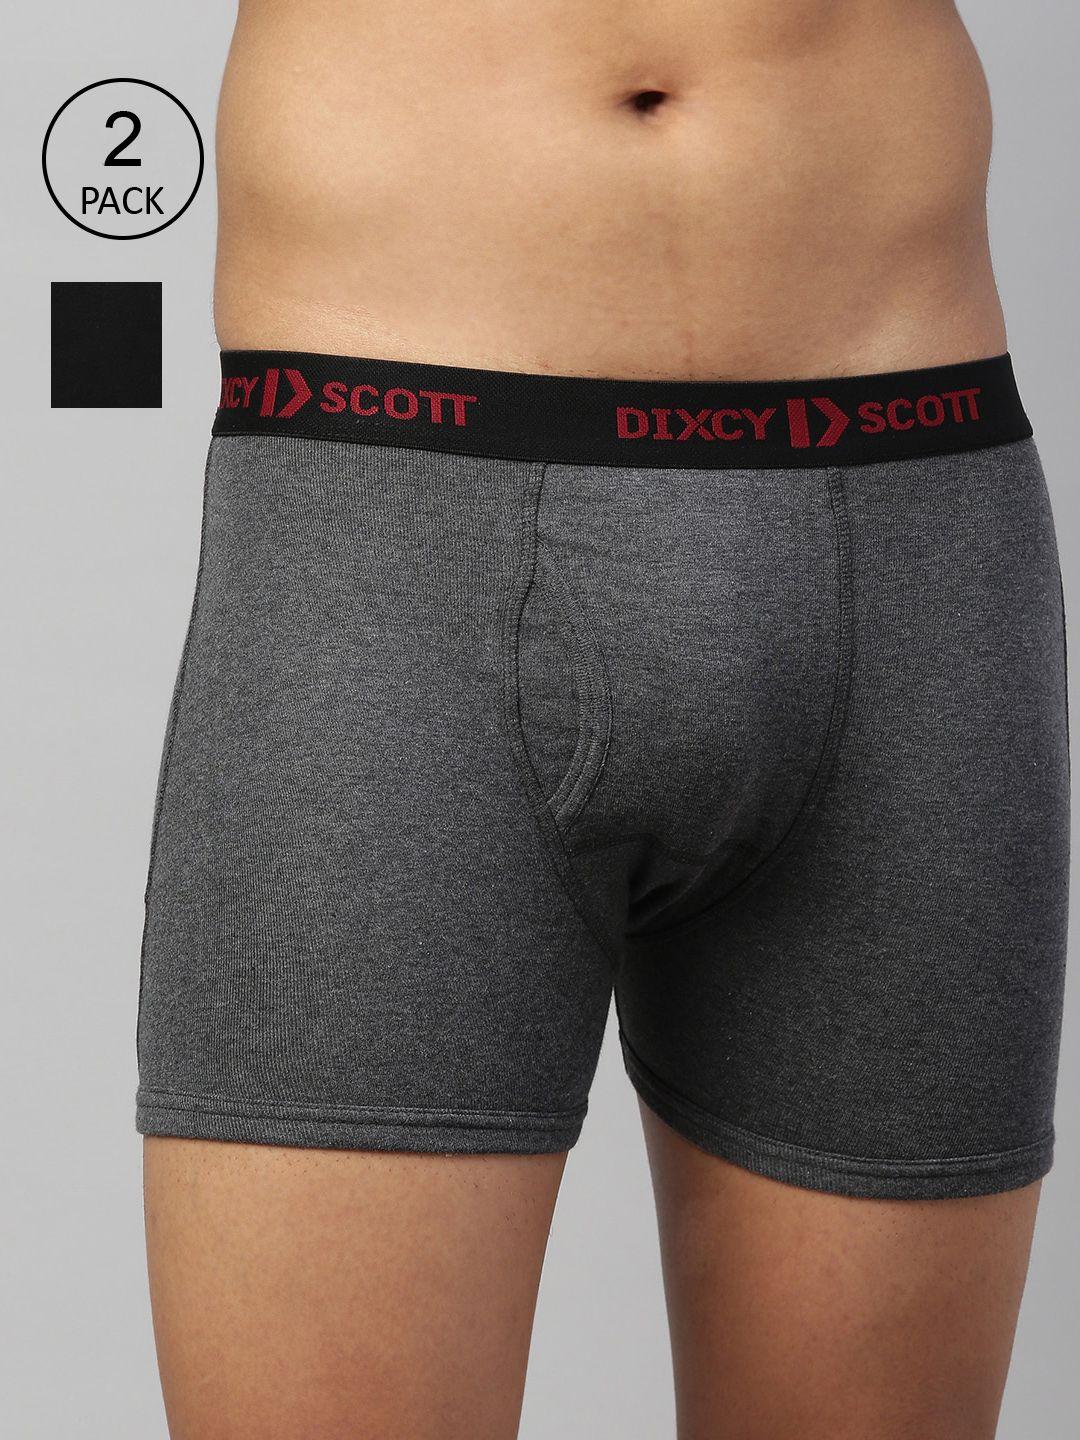 DIXCY SCOTT MAXIMUS Men Pack of 2 Solid Cotton Trunks MAXT-003-KINETIC TRUNK-P2